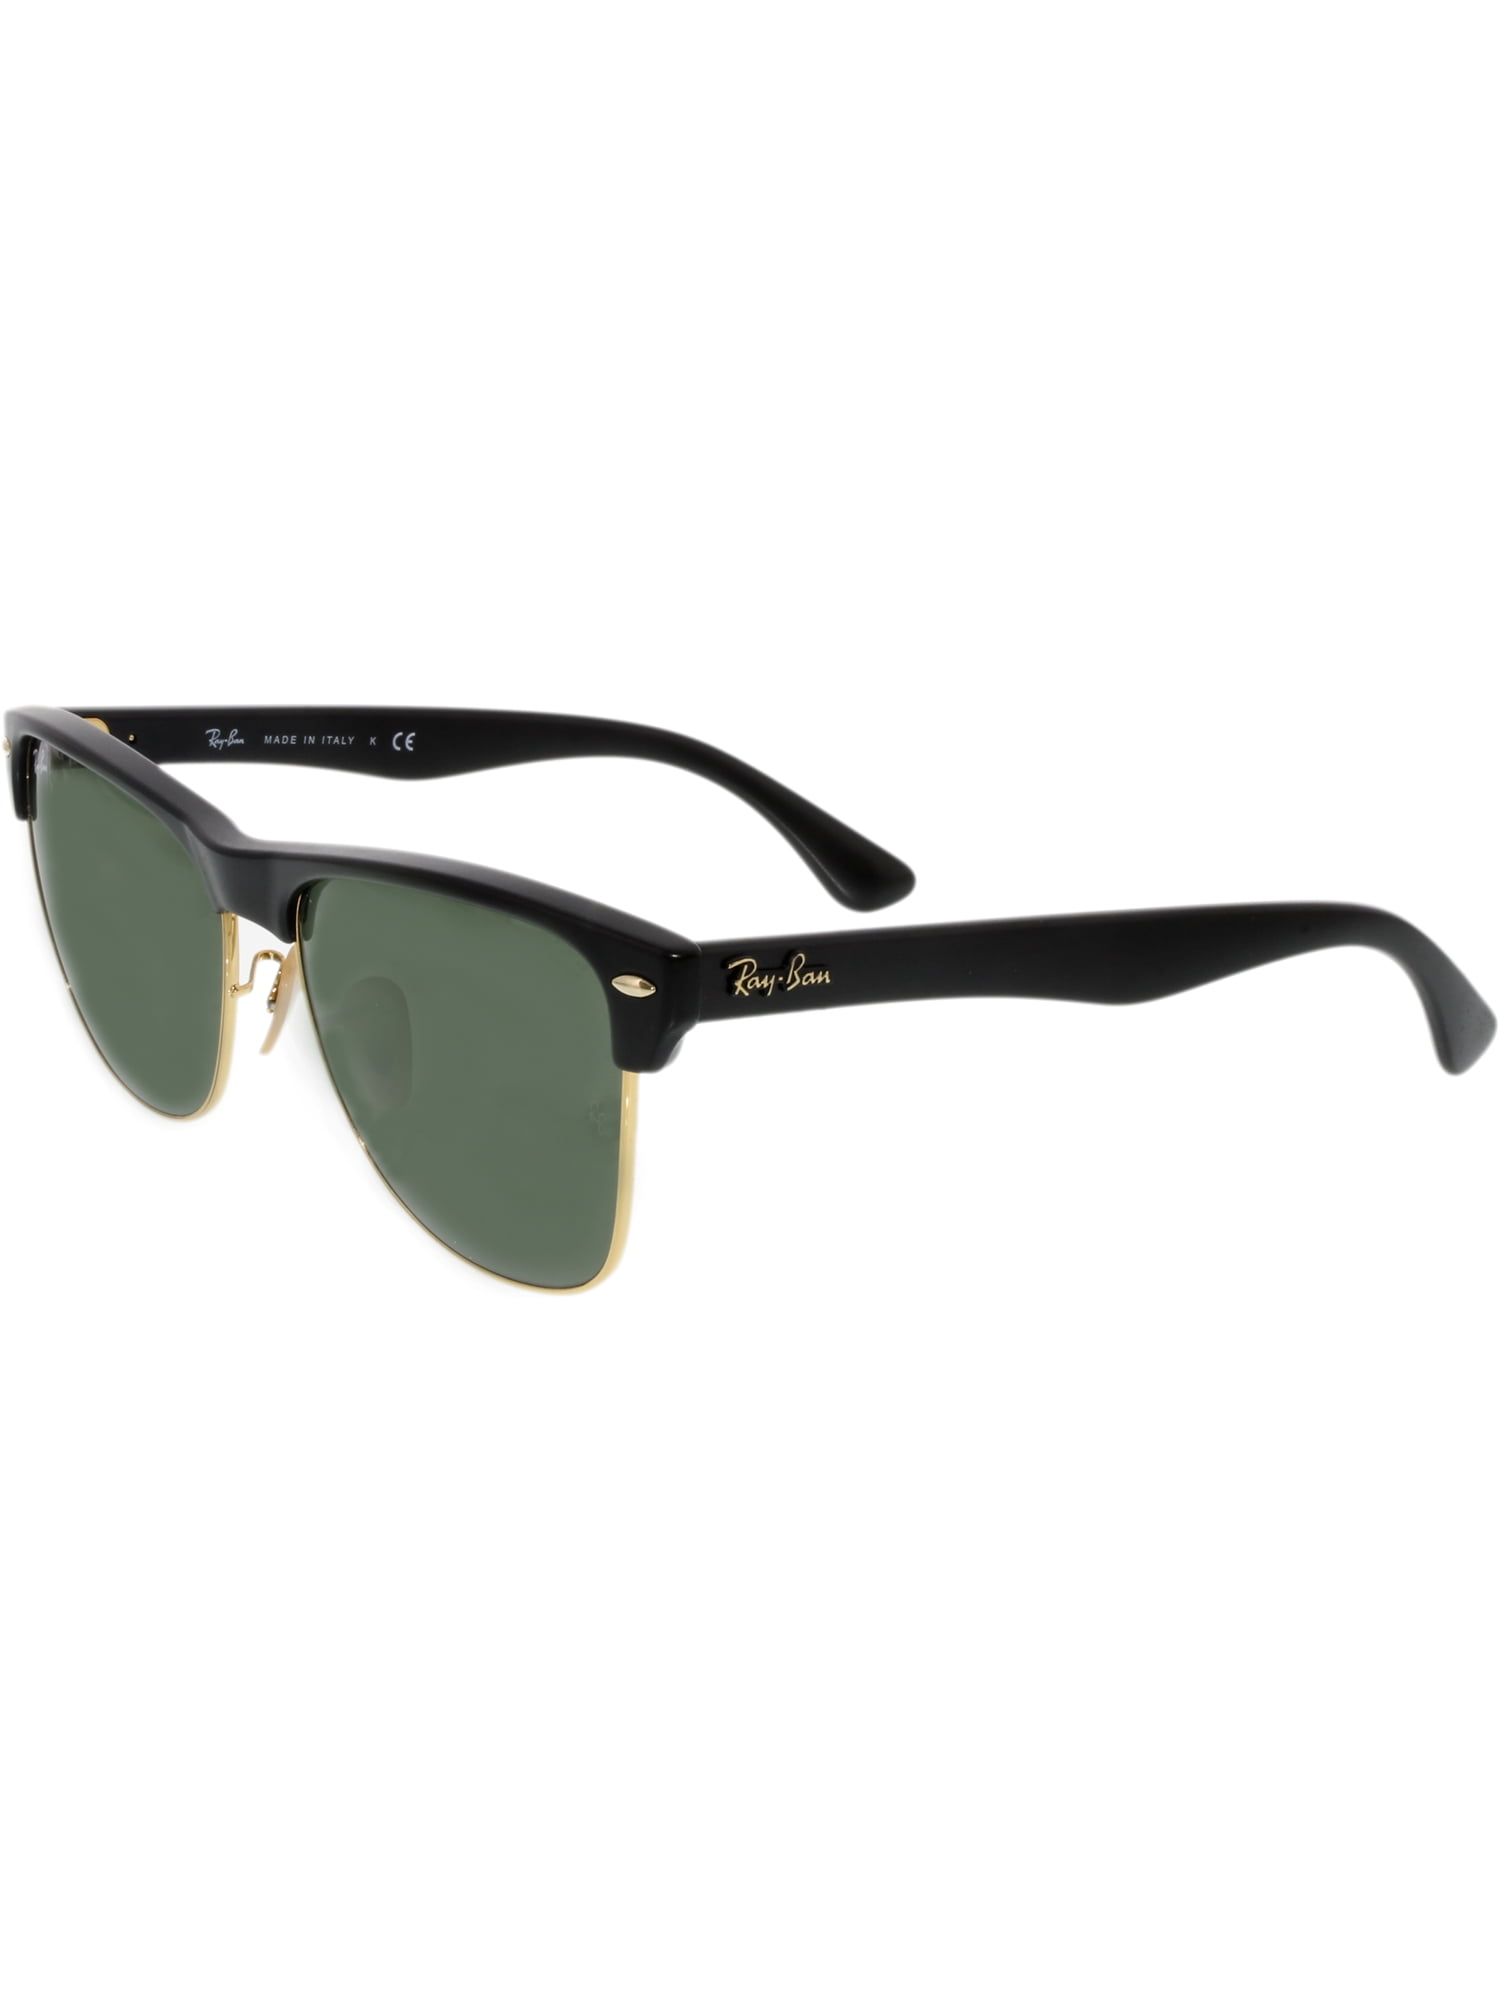 ray ban 0rb4175 square sunglasses